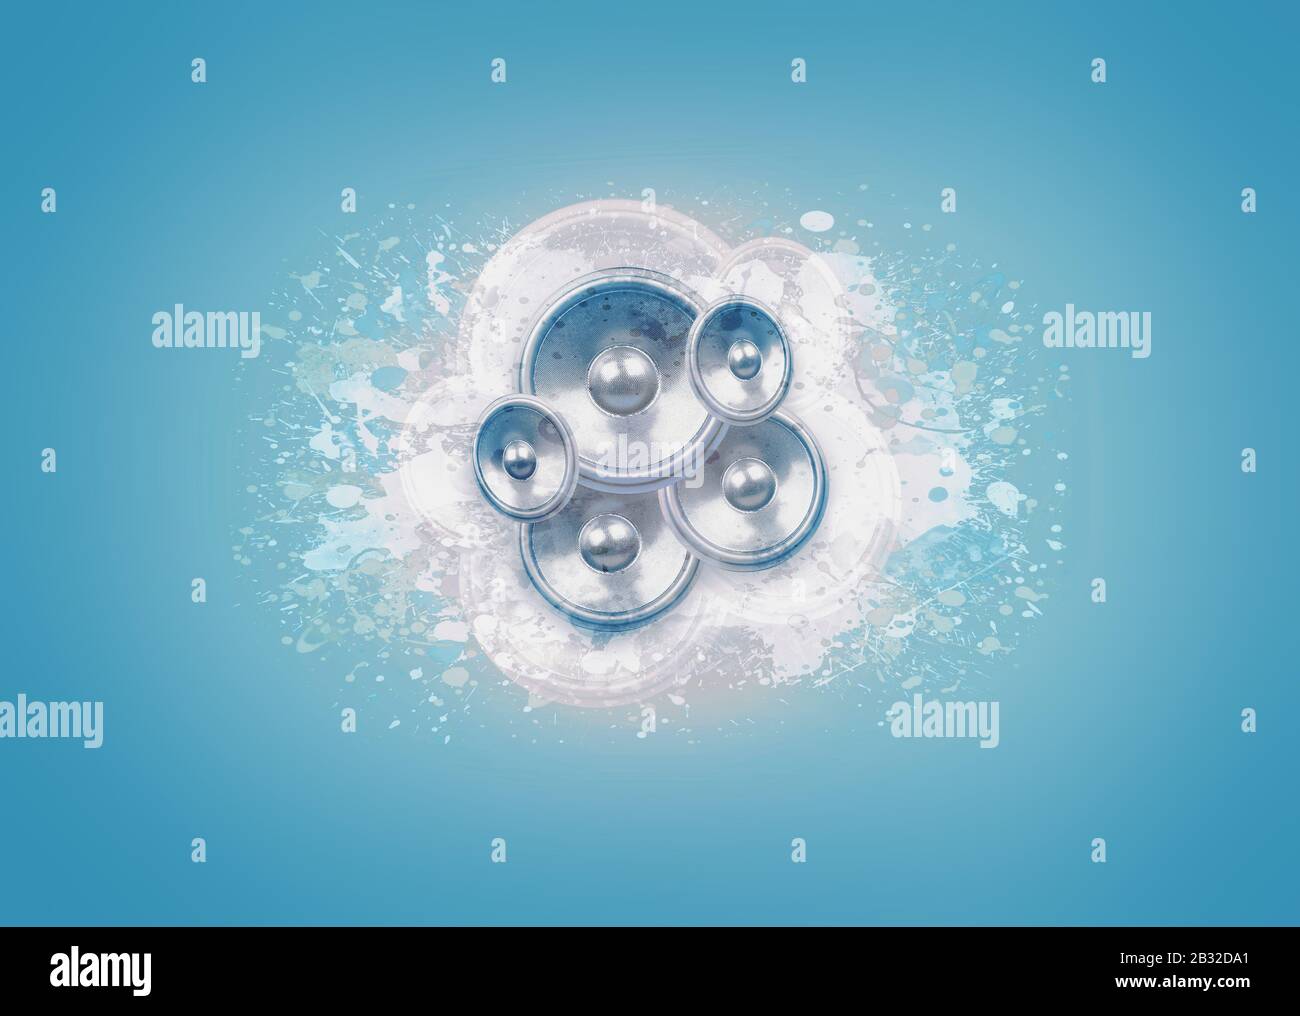 Audio speakers and paint splashes on a glowing blue background with vignette Stock Photo